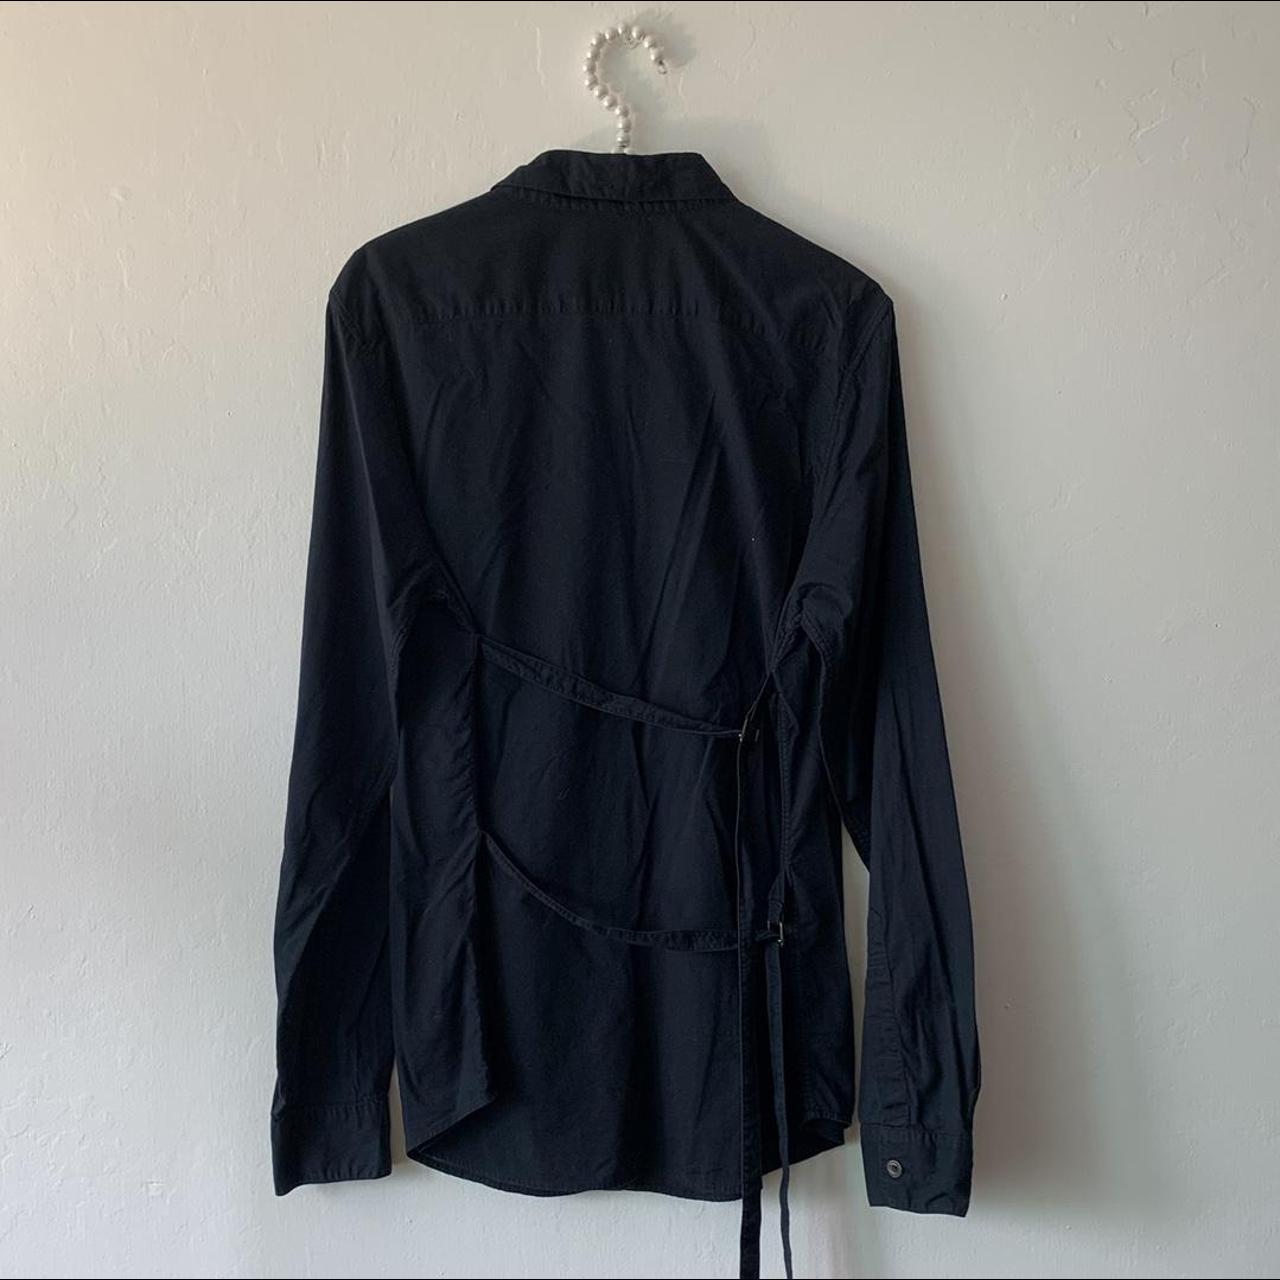 Product Image 3 - ⛓ ann demeulemeester navy blue